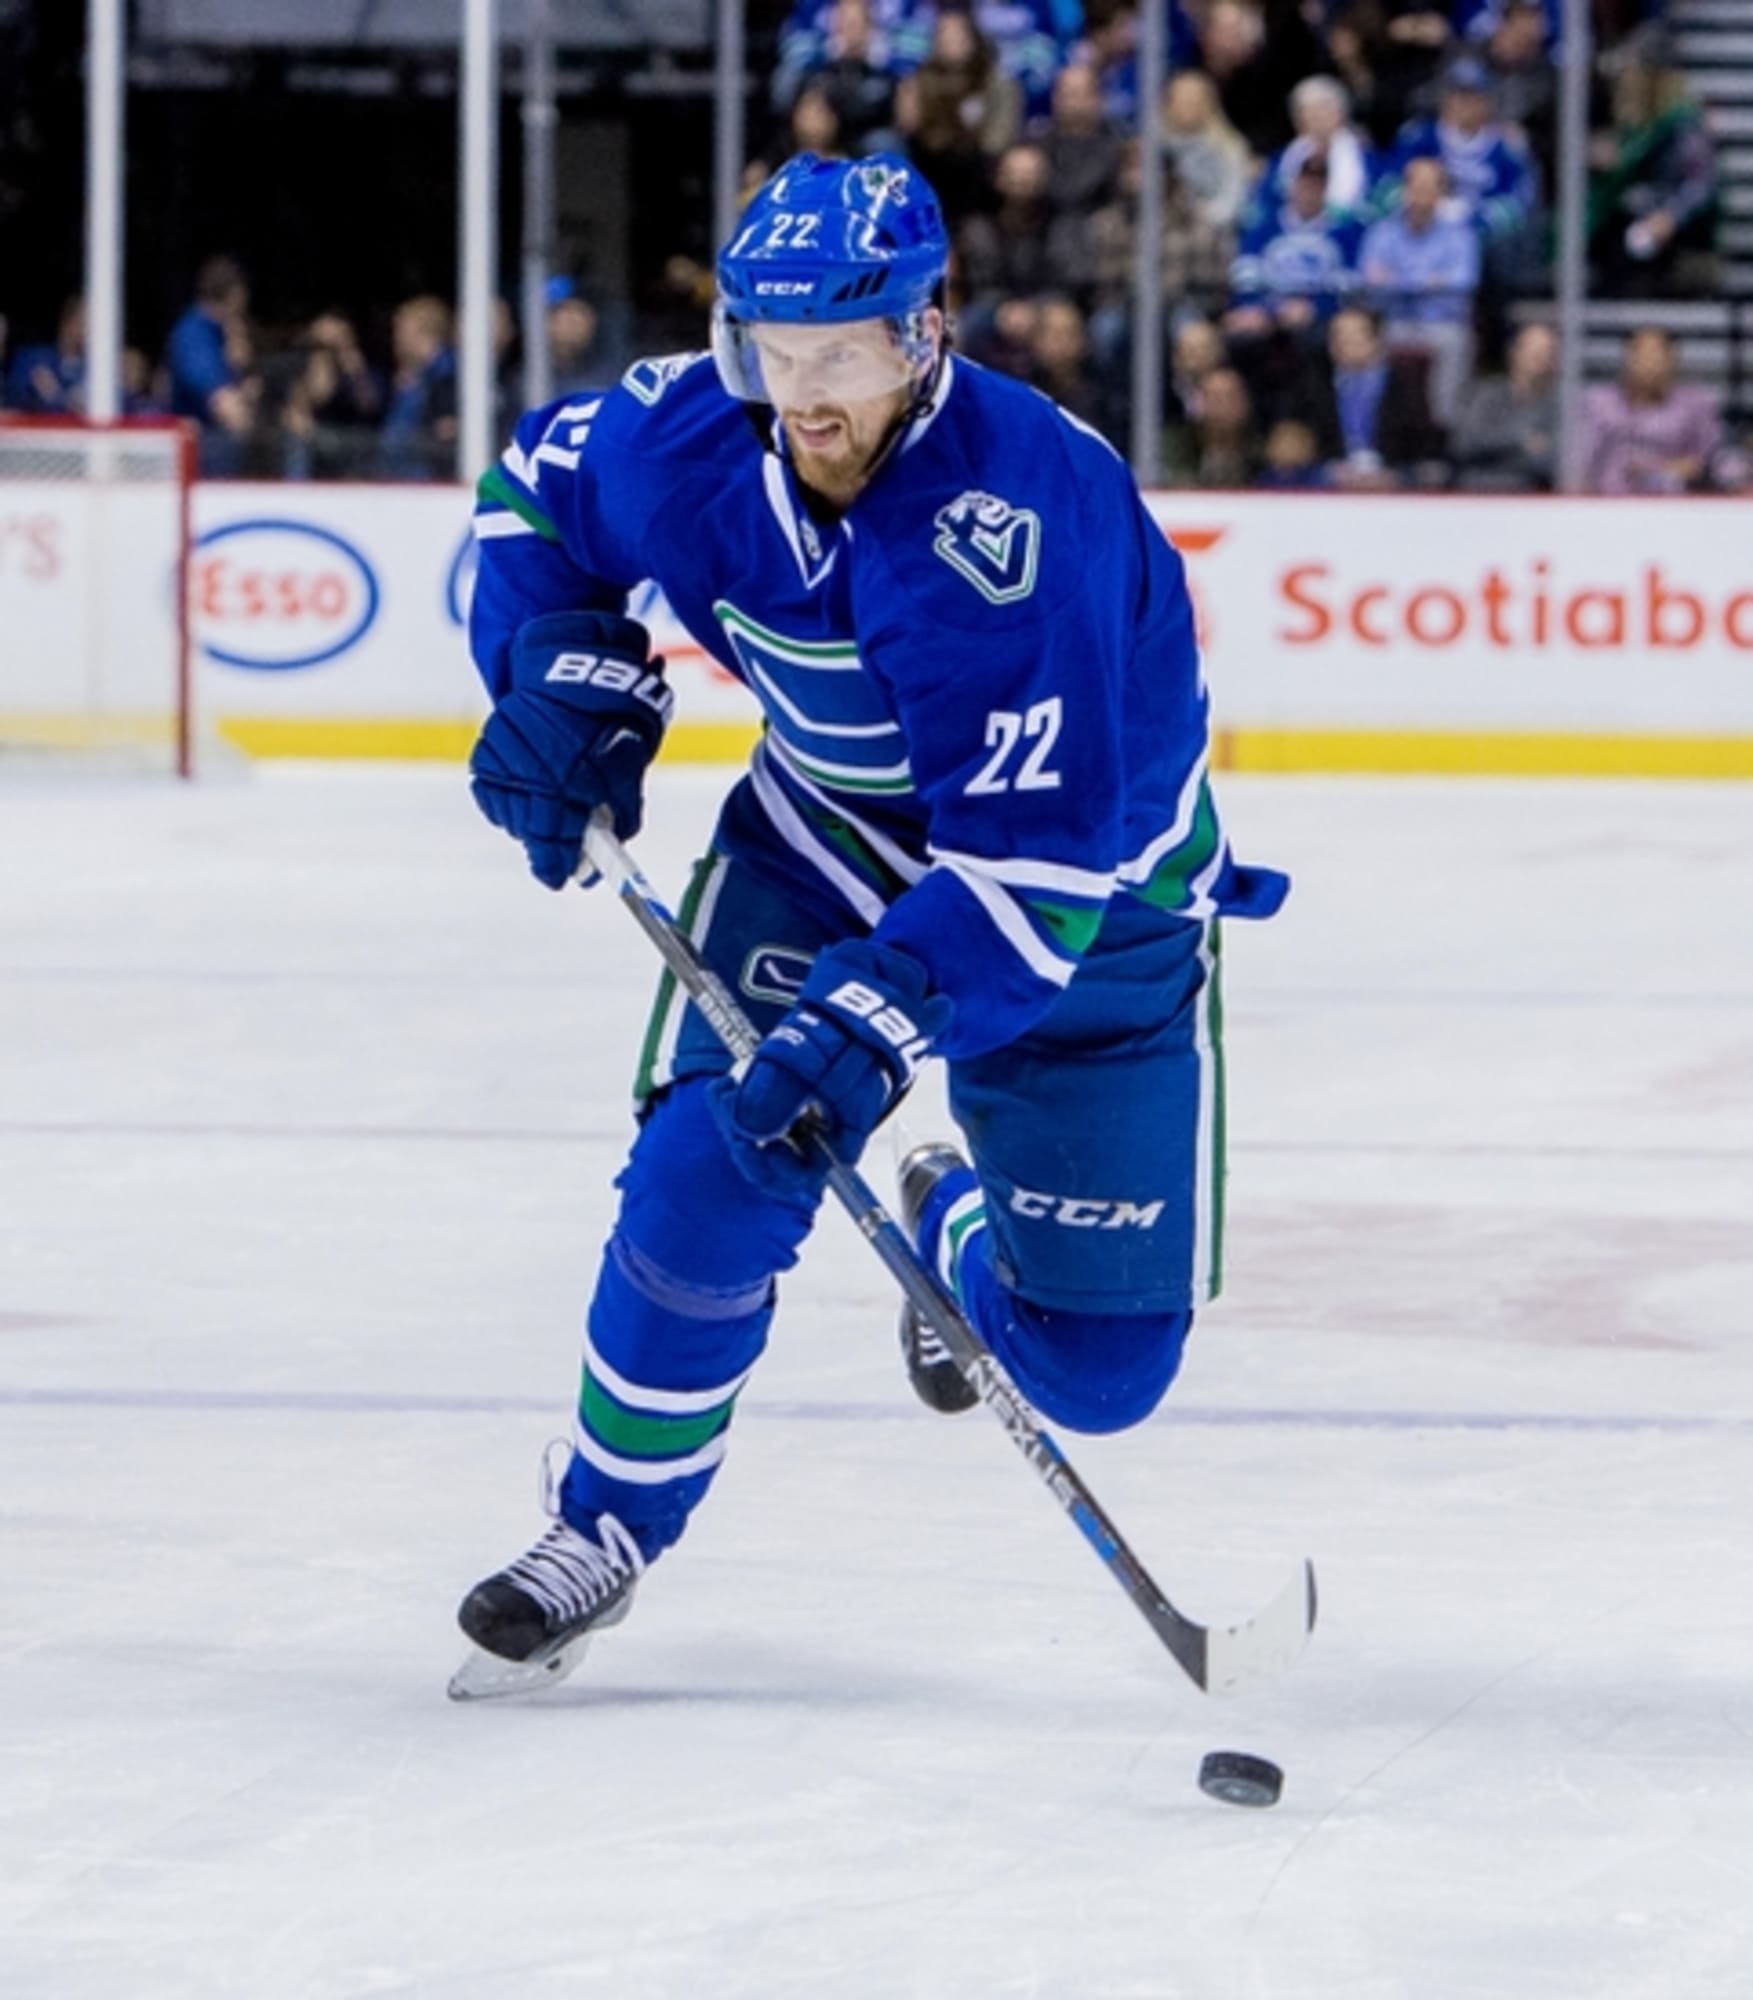 Vancouver Canucks The NHL AllStar Game Just Got a Whole Lot Worse